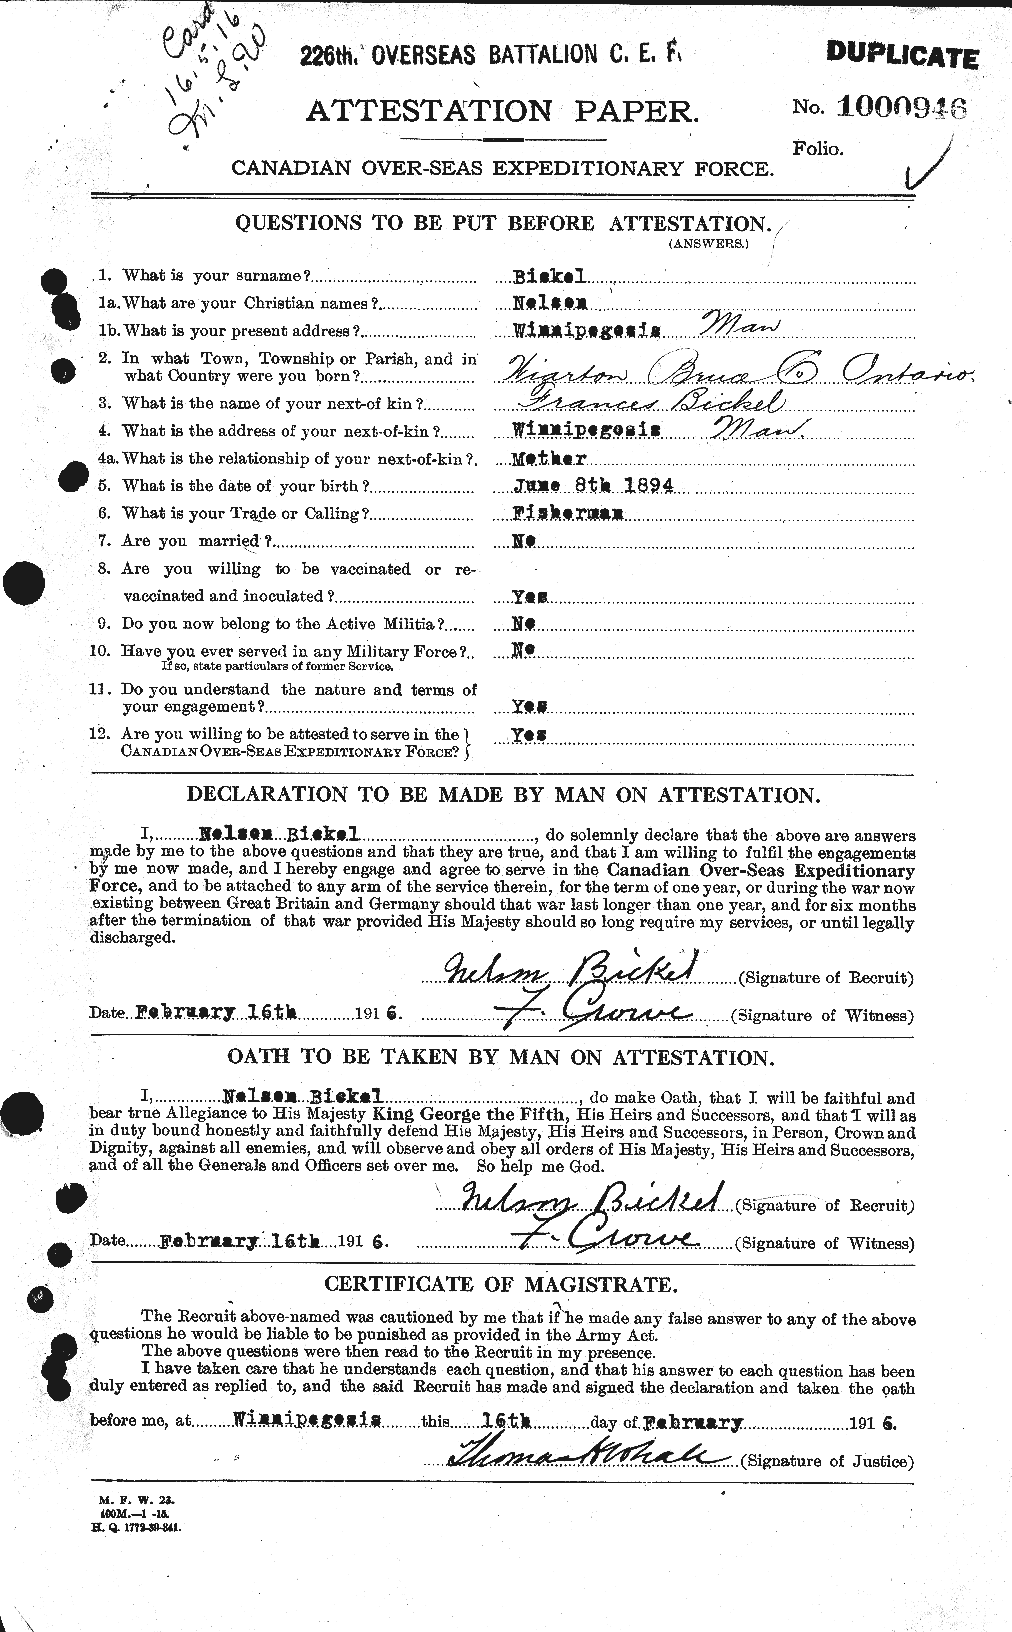 Personnel Records of the First World War - CEF 244976a